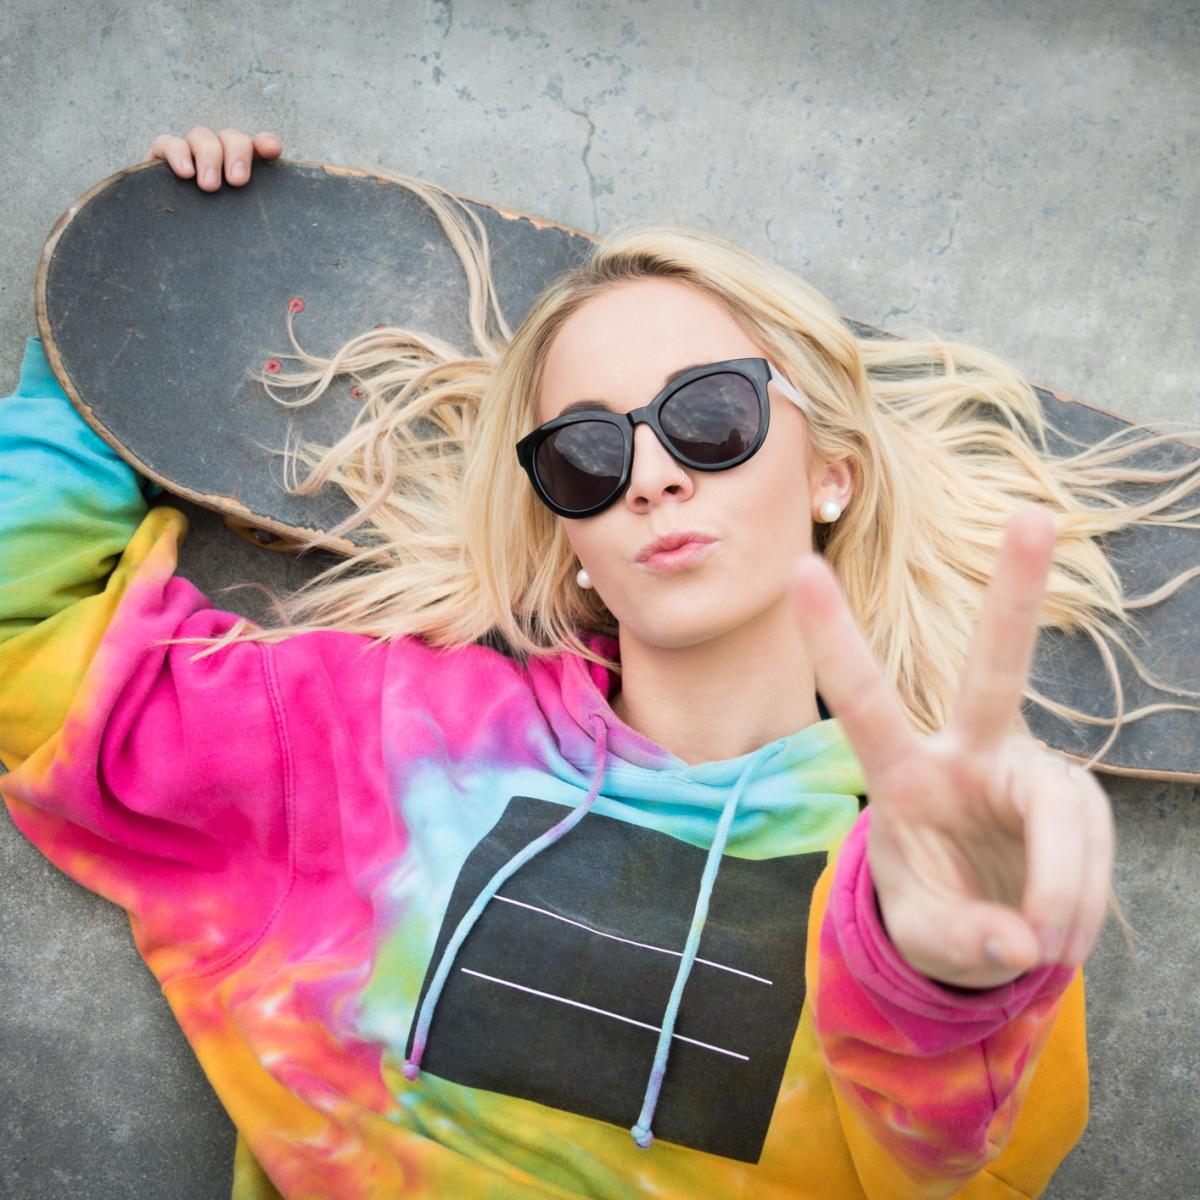 Girl wearing tie dye laying on ground with skateboard and holding a peace sign